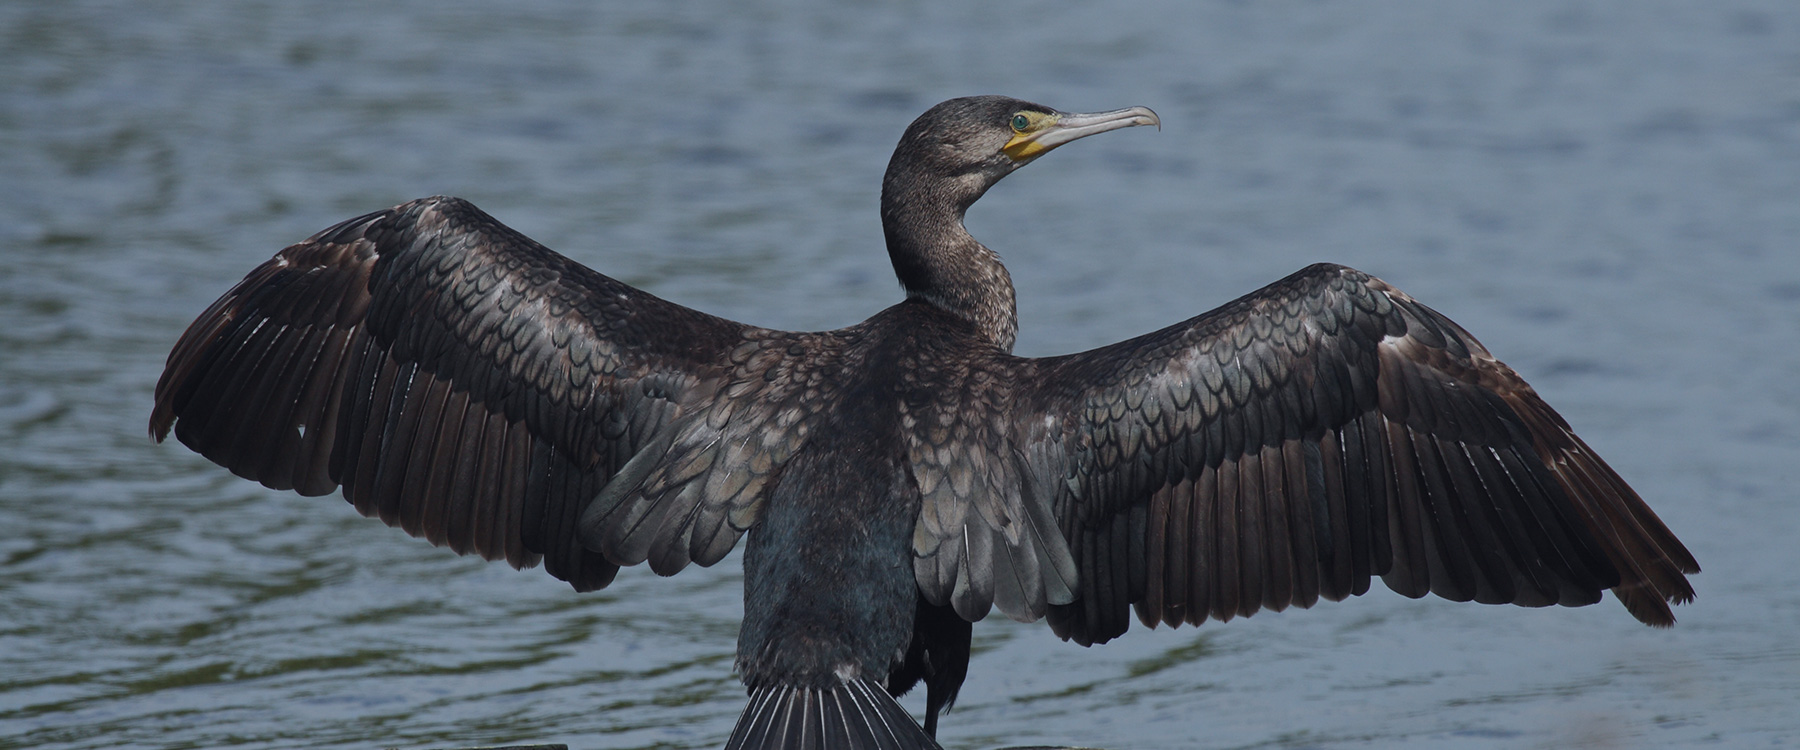 a cormorant with outstretched wings